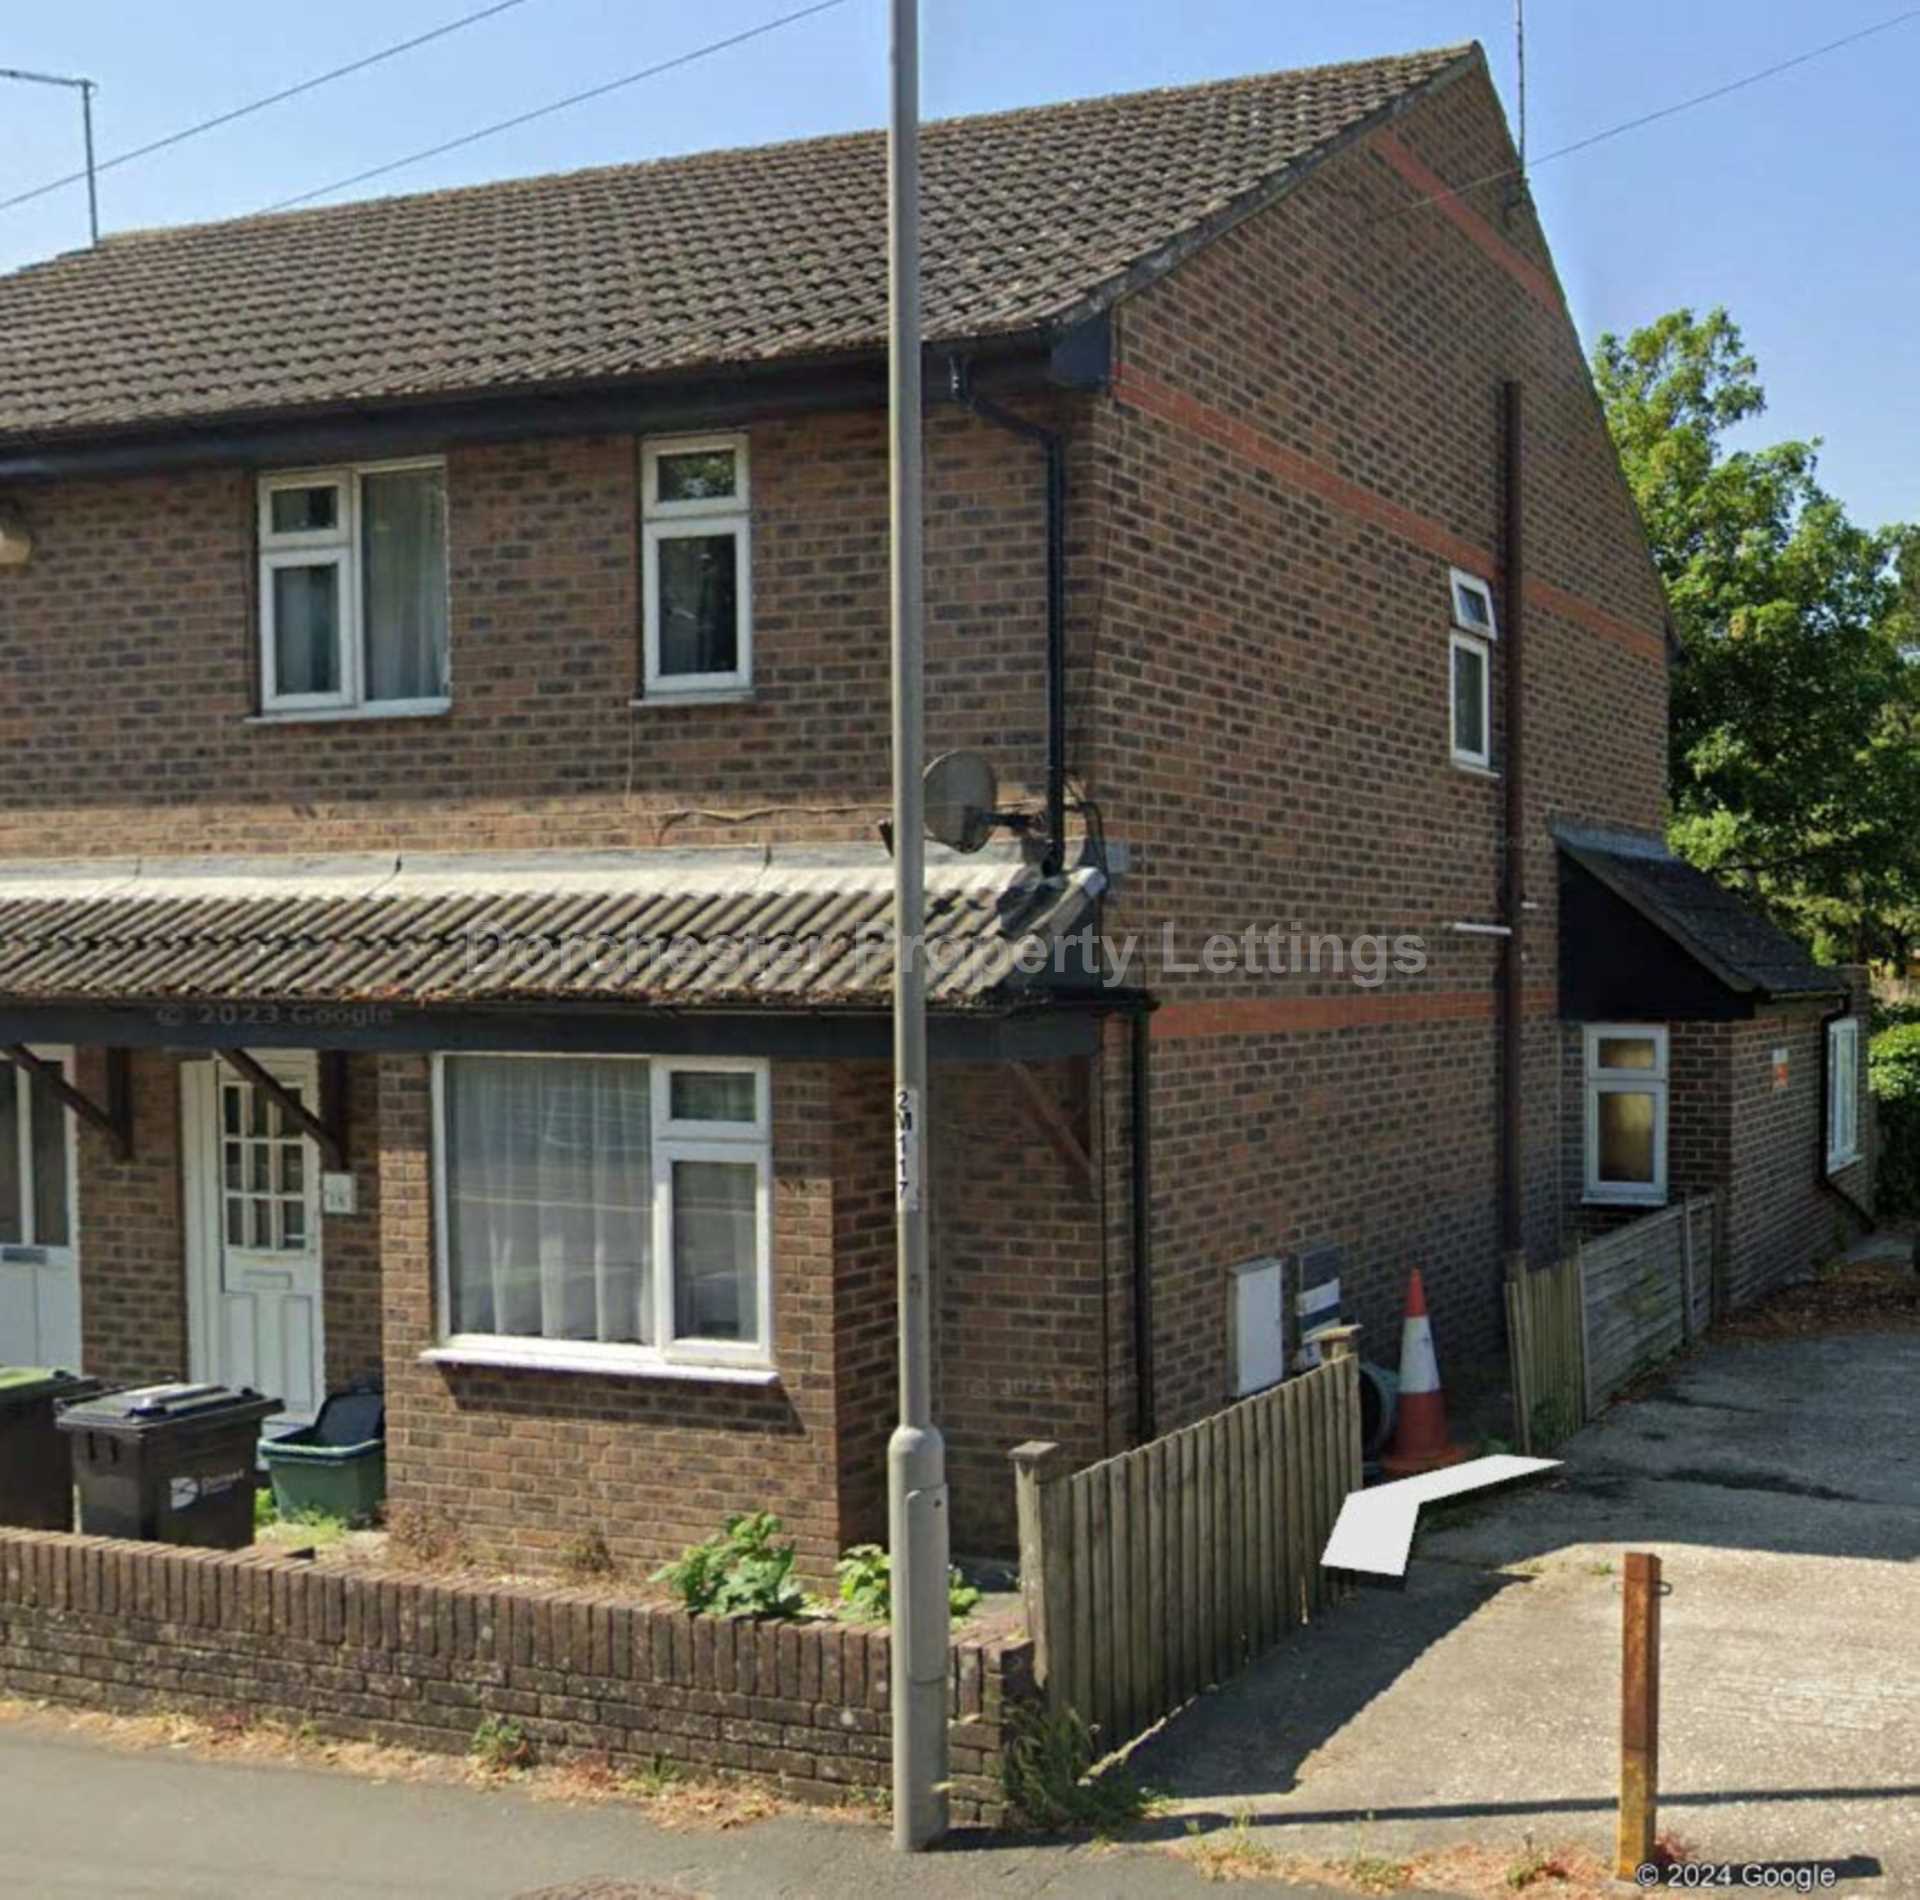 3 bed Semi-Detached House for rent in Dorchester. From Dorchester Property Lettings Ltd